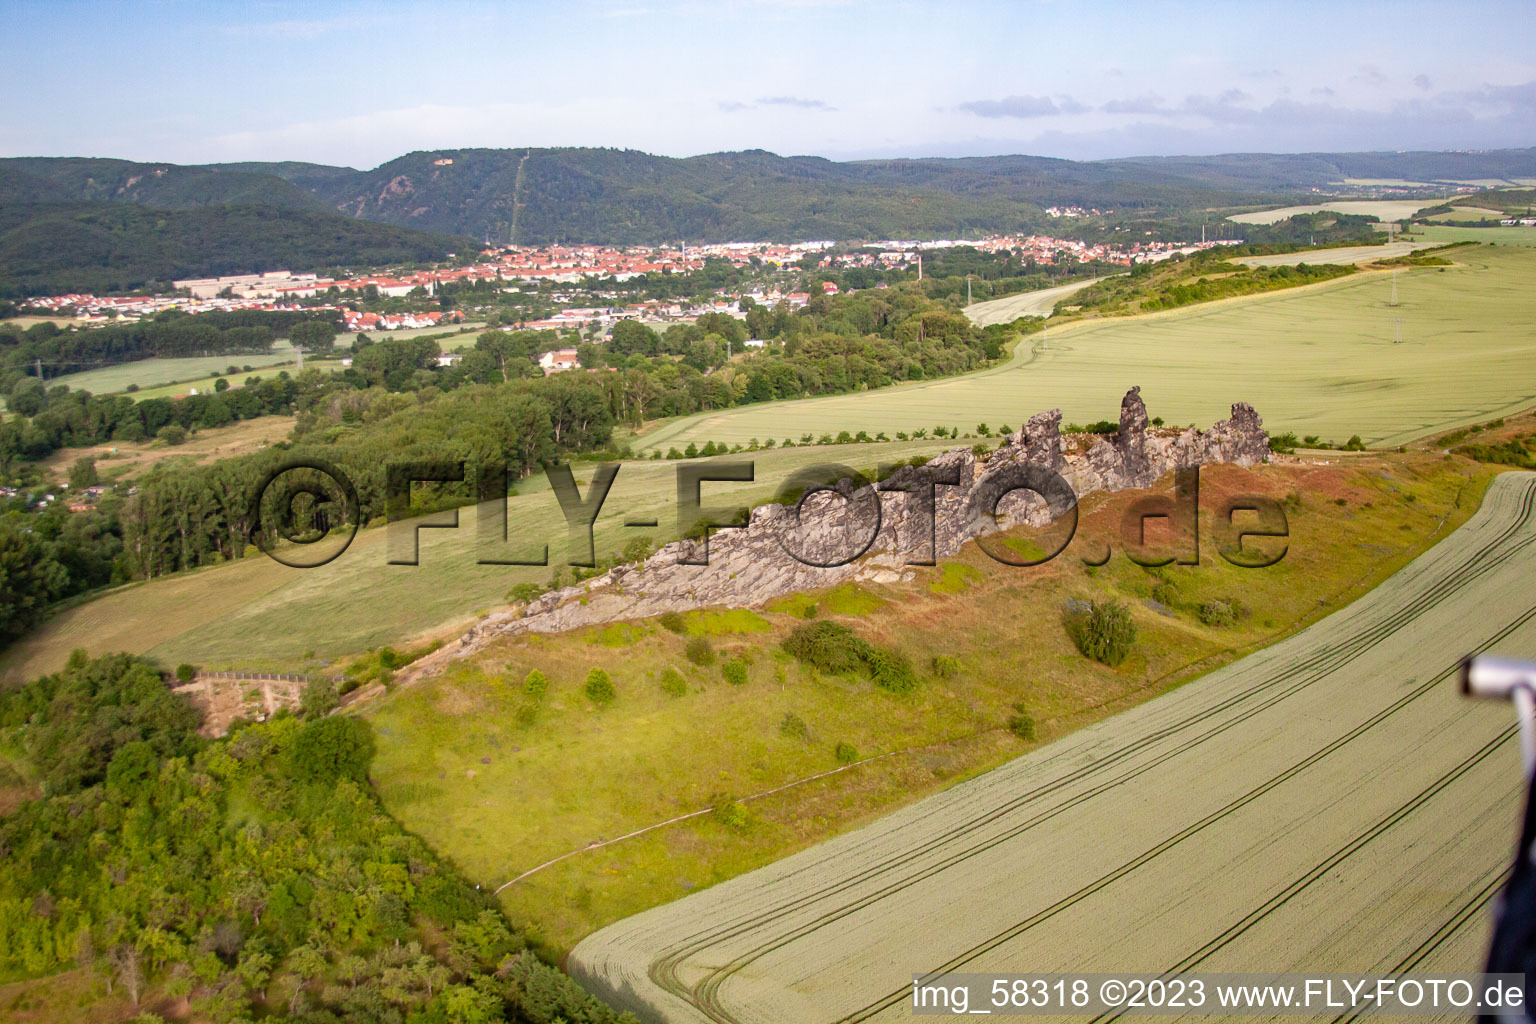 Aerial view of Felwall counterstones at Weddersleben in the district Weddersleben in Thale in the state Saxony-Anhalt, Germany